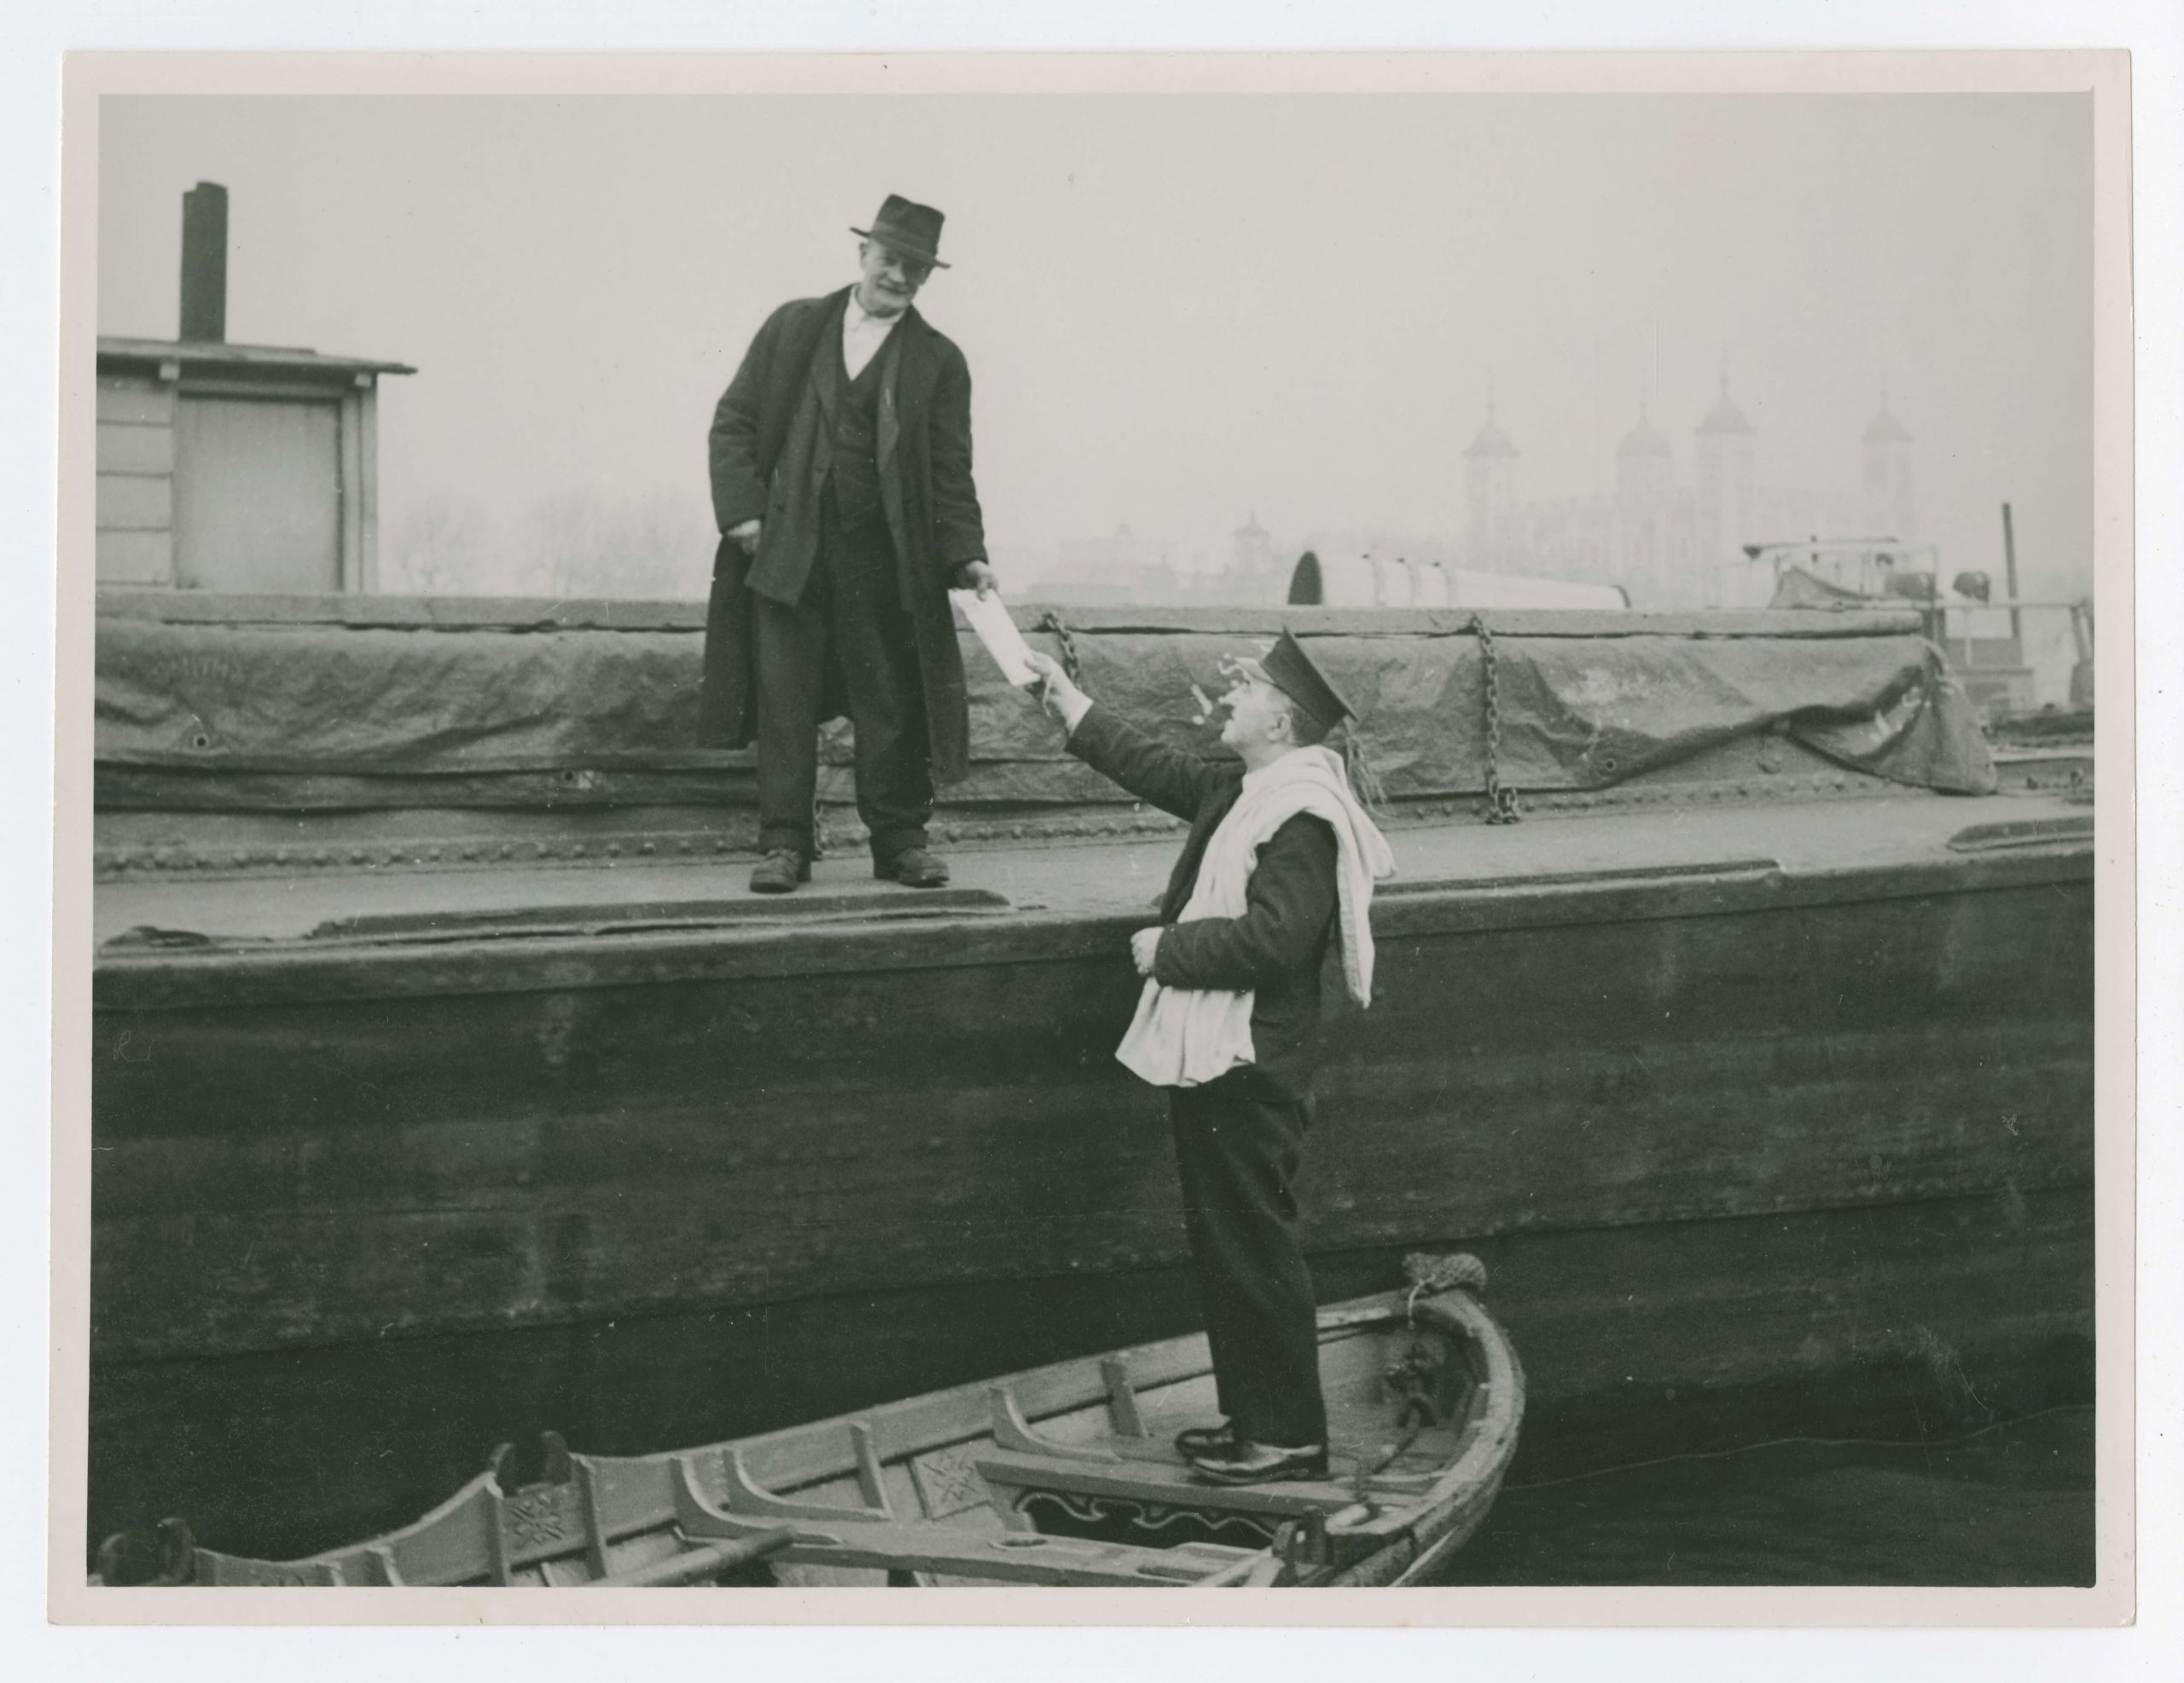 Herbert stands on one of the seats of his skiff, handing a white envelope up towards a man stood on the dock. Herbert is wearing his all black uniform, with postman cap, with a white sack tossed over his shoulder. The man he is handing the letter to looks directly at the camera and wears baggy looking dark clothes, a hat and a long trench coat.